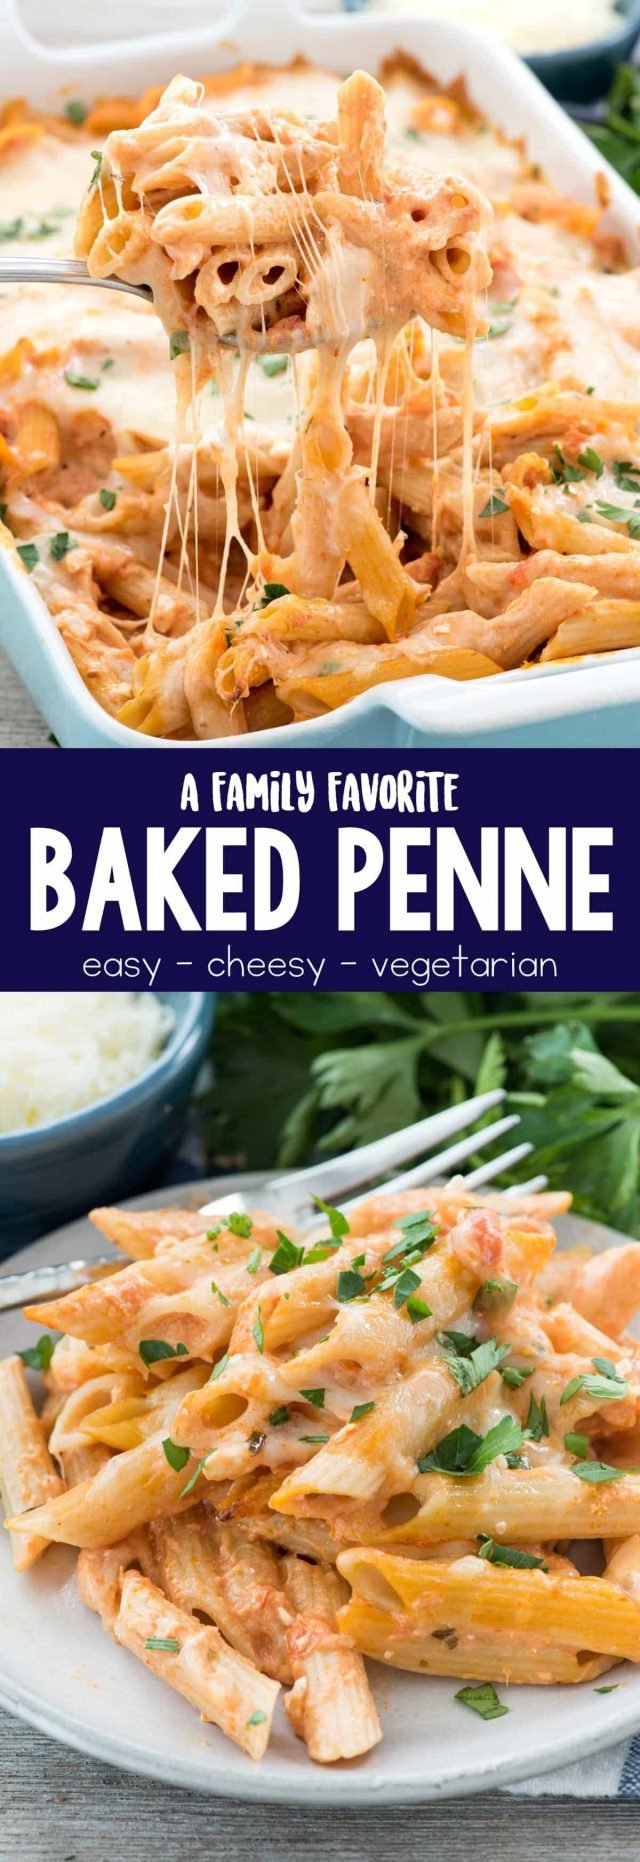 photo collage - Easy Baked Penne in a blue casserole dish. And baked penned in a small serving dish. 